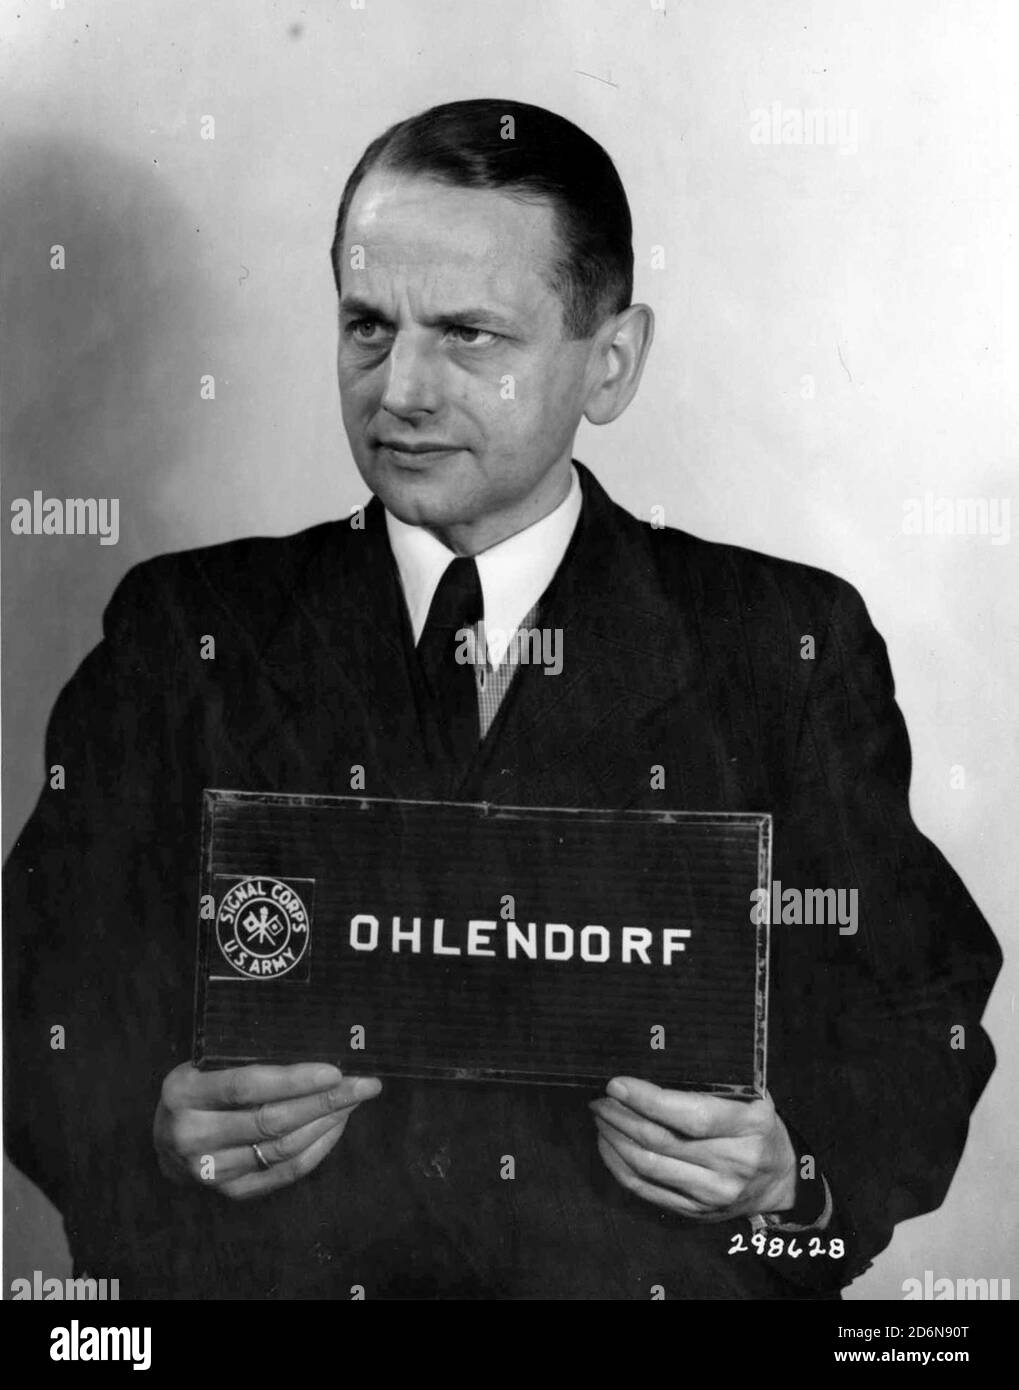 Otto Ohlendorf (1907 – 1951) German SS functionary and Holocaust perpetrator during the Nazi era, head of the Sicherheitsdienst (SD) Inland, responsible for intelligence and security within Germany. In 1941, Ohlendorf was appointed the commander of Einsatzgruppe D, which perpetrated mass murder in Moldova, south Ukraine, the Crimea and, during 1942, the North Caucasus. He was tried at the Einsatzgruppen Trial, convicted and executed in 1951 Stock Photo